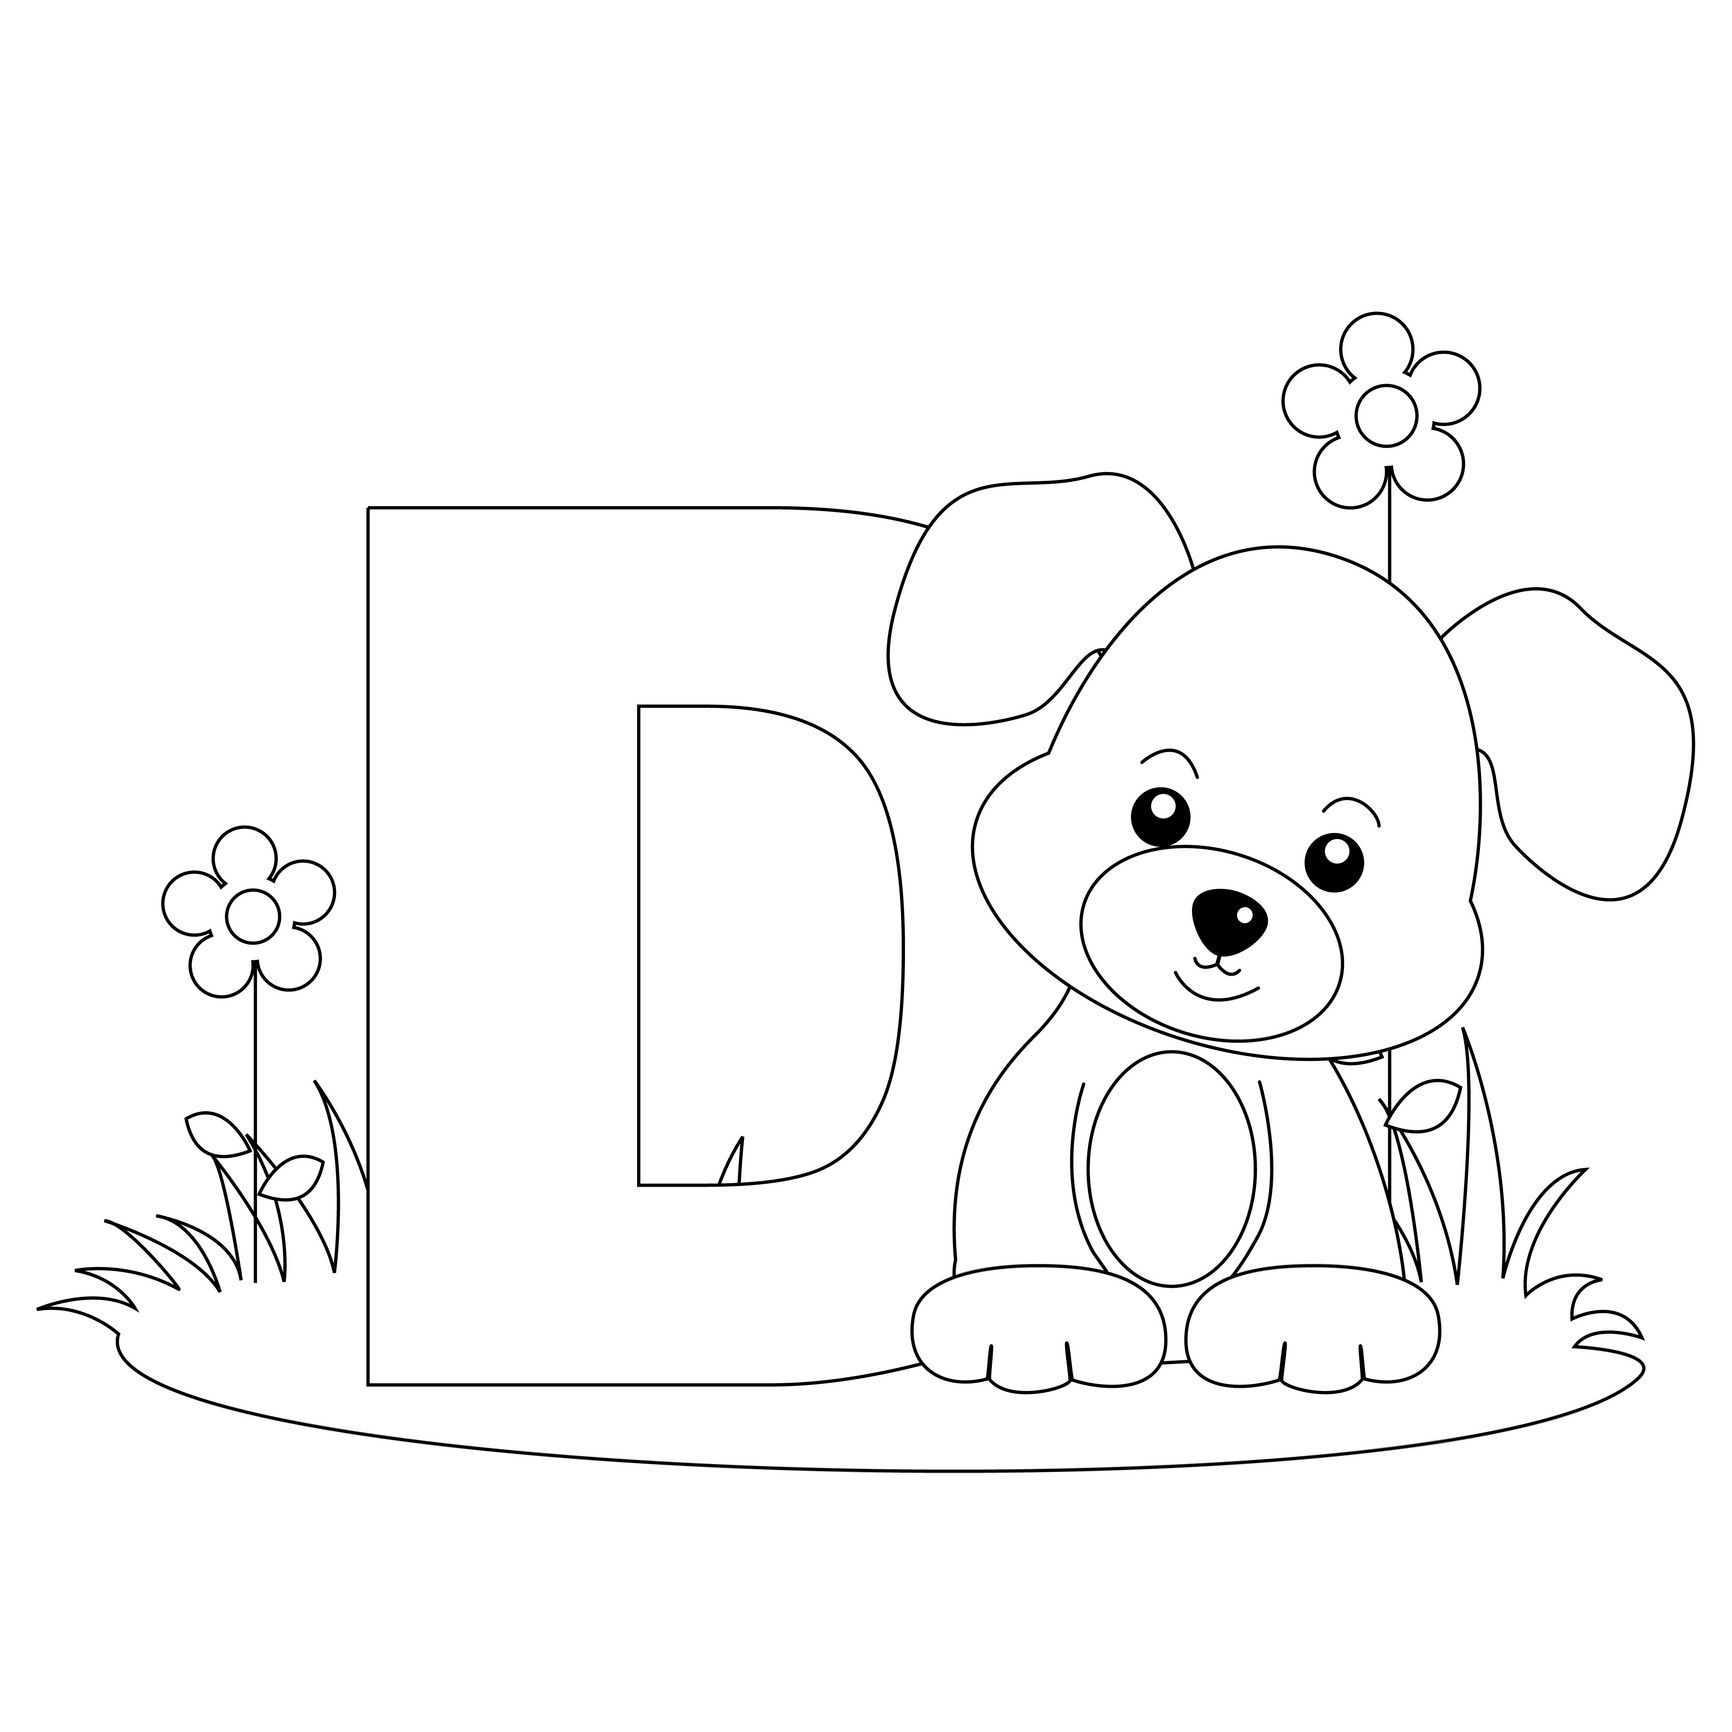 Animal Alphabet Letter D Is For Dog! Here&amp;#039;s A Simple | Alphabet - Free Printable Animal Alphabet Letters